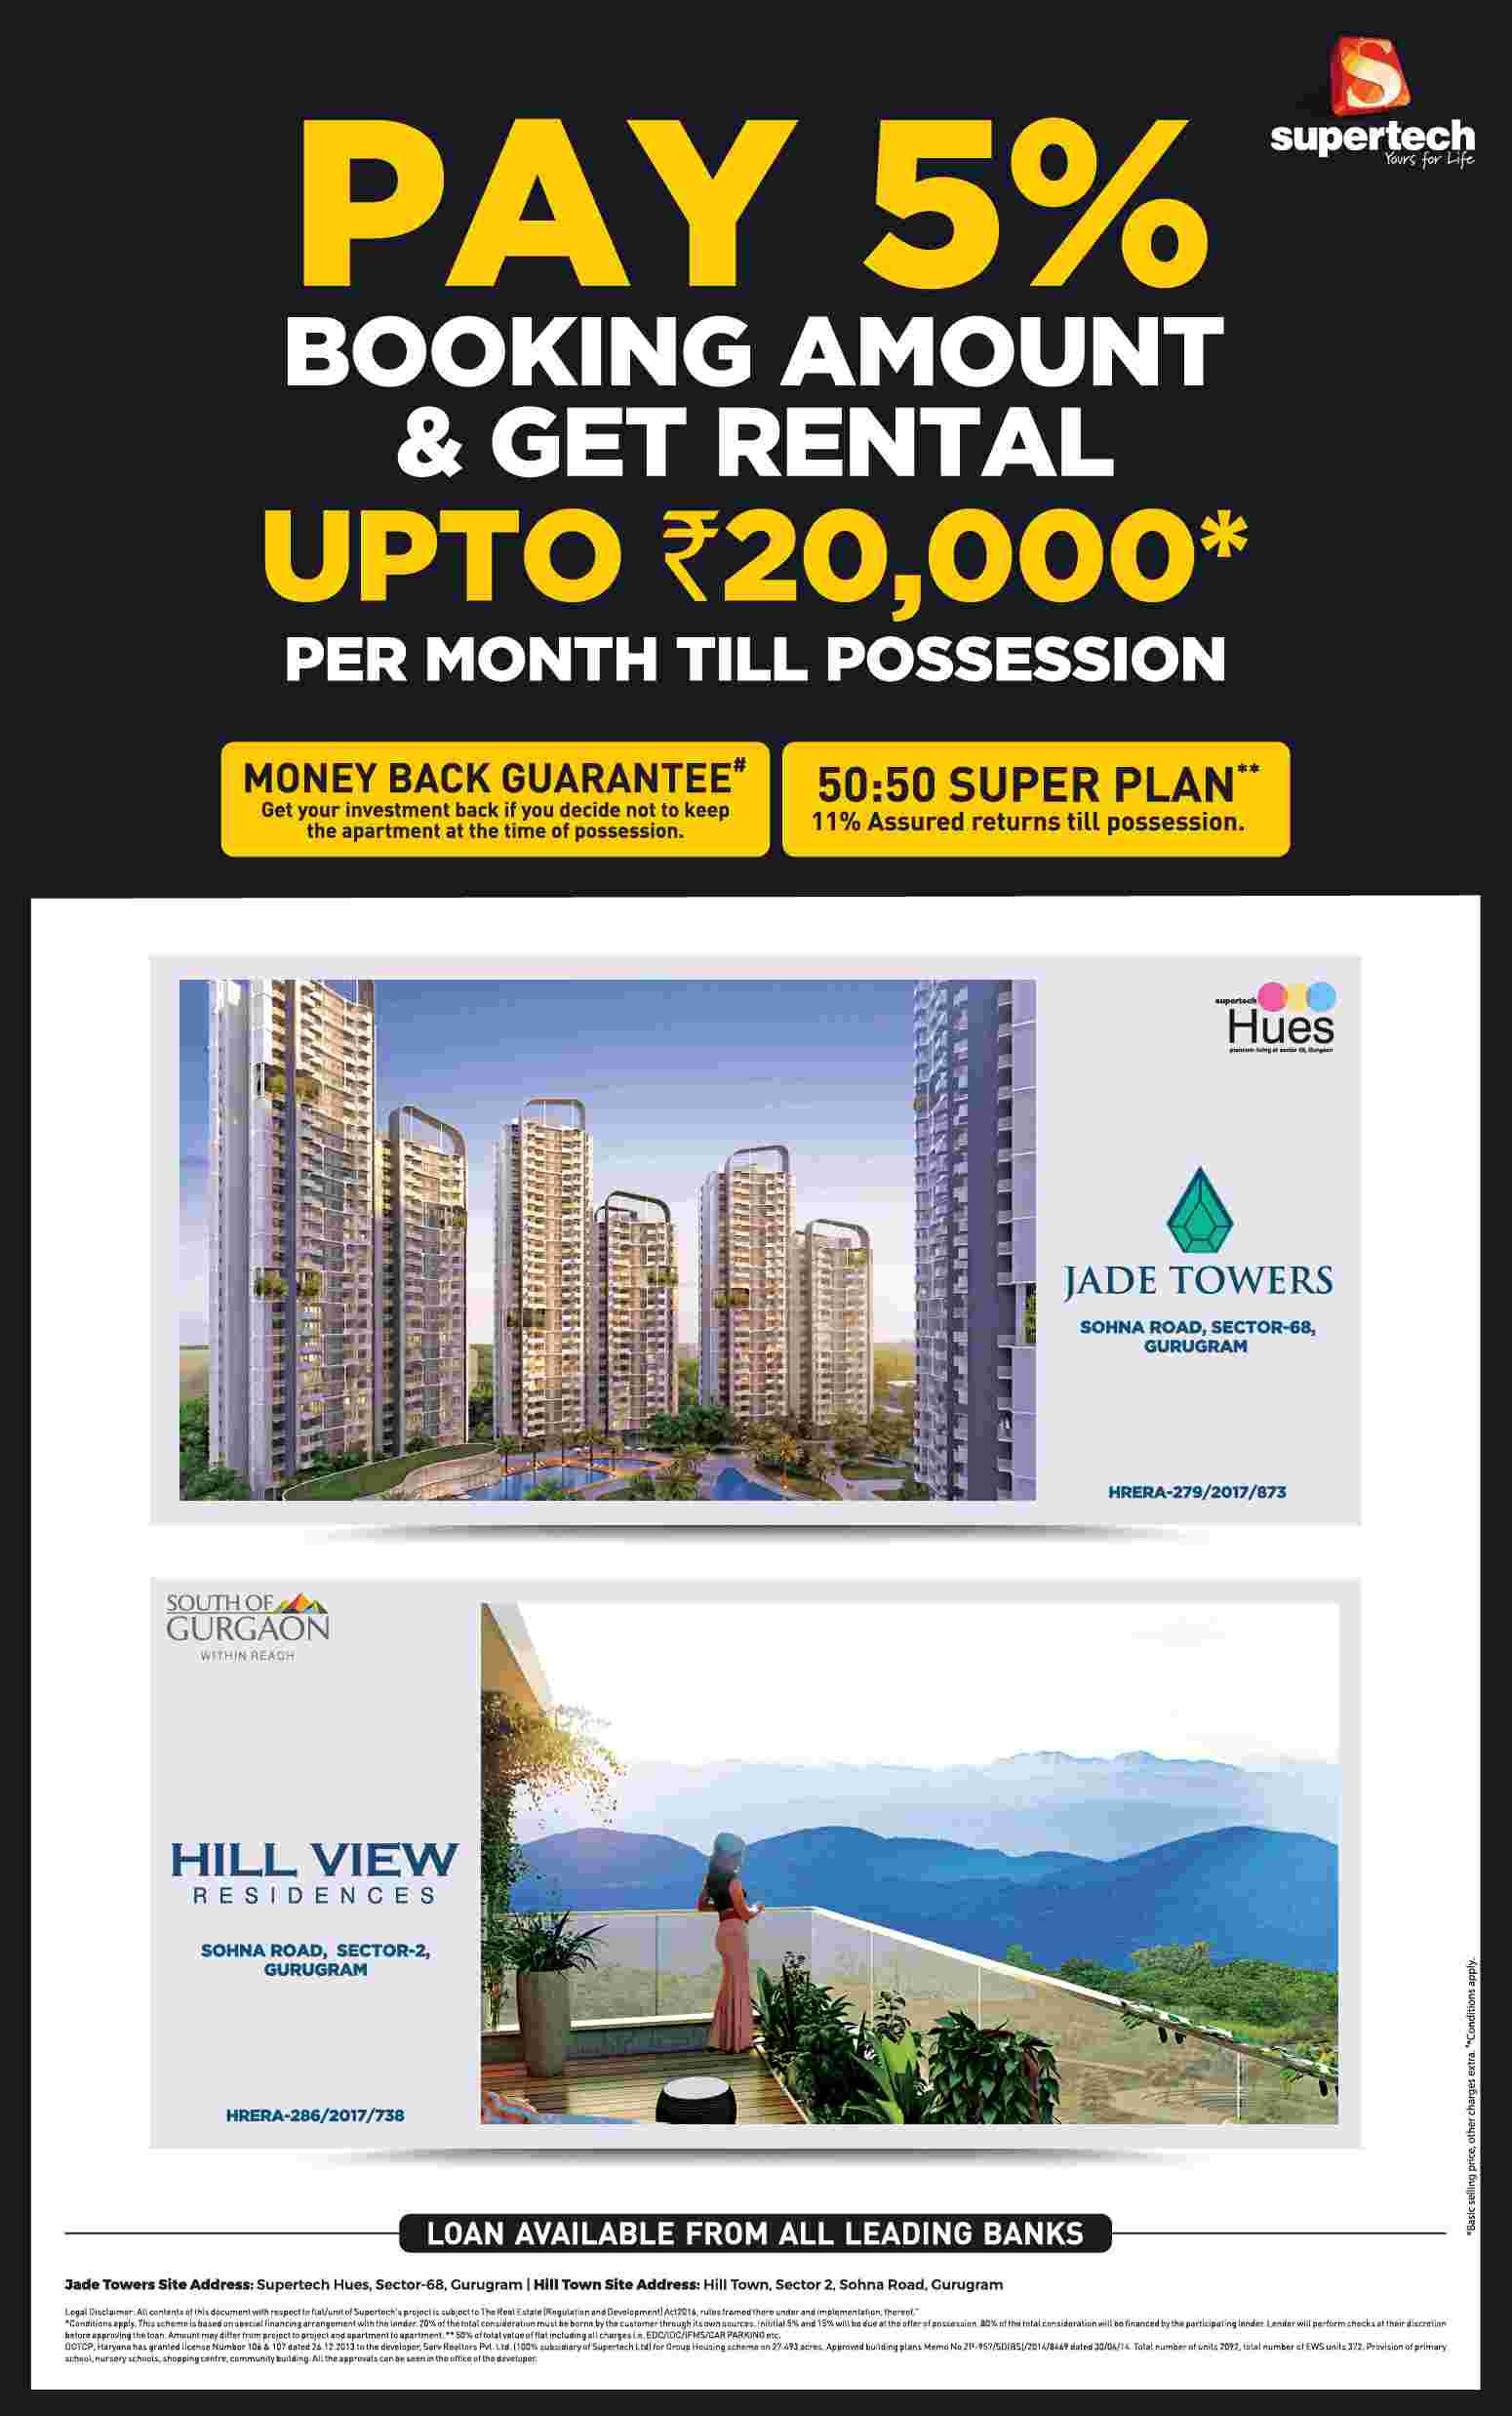 Pay 5% booking amount & get rental up to Rs. 20,000 per month till possession at Supertech projects in Gurgaon Update